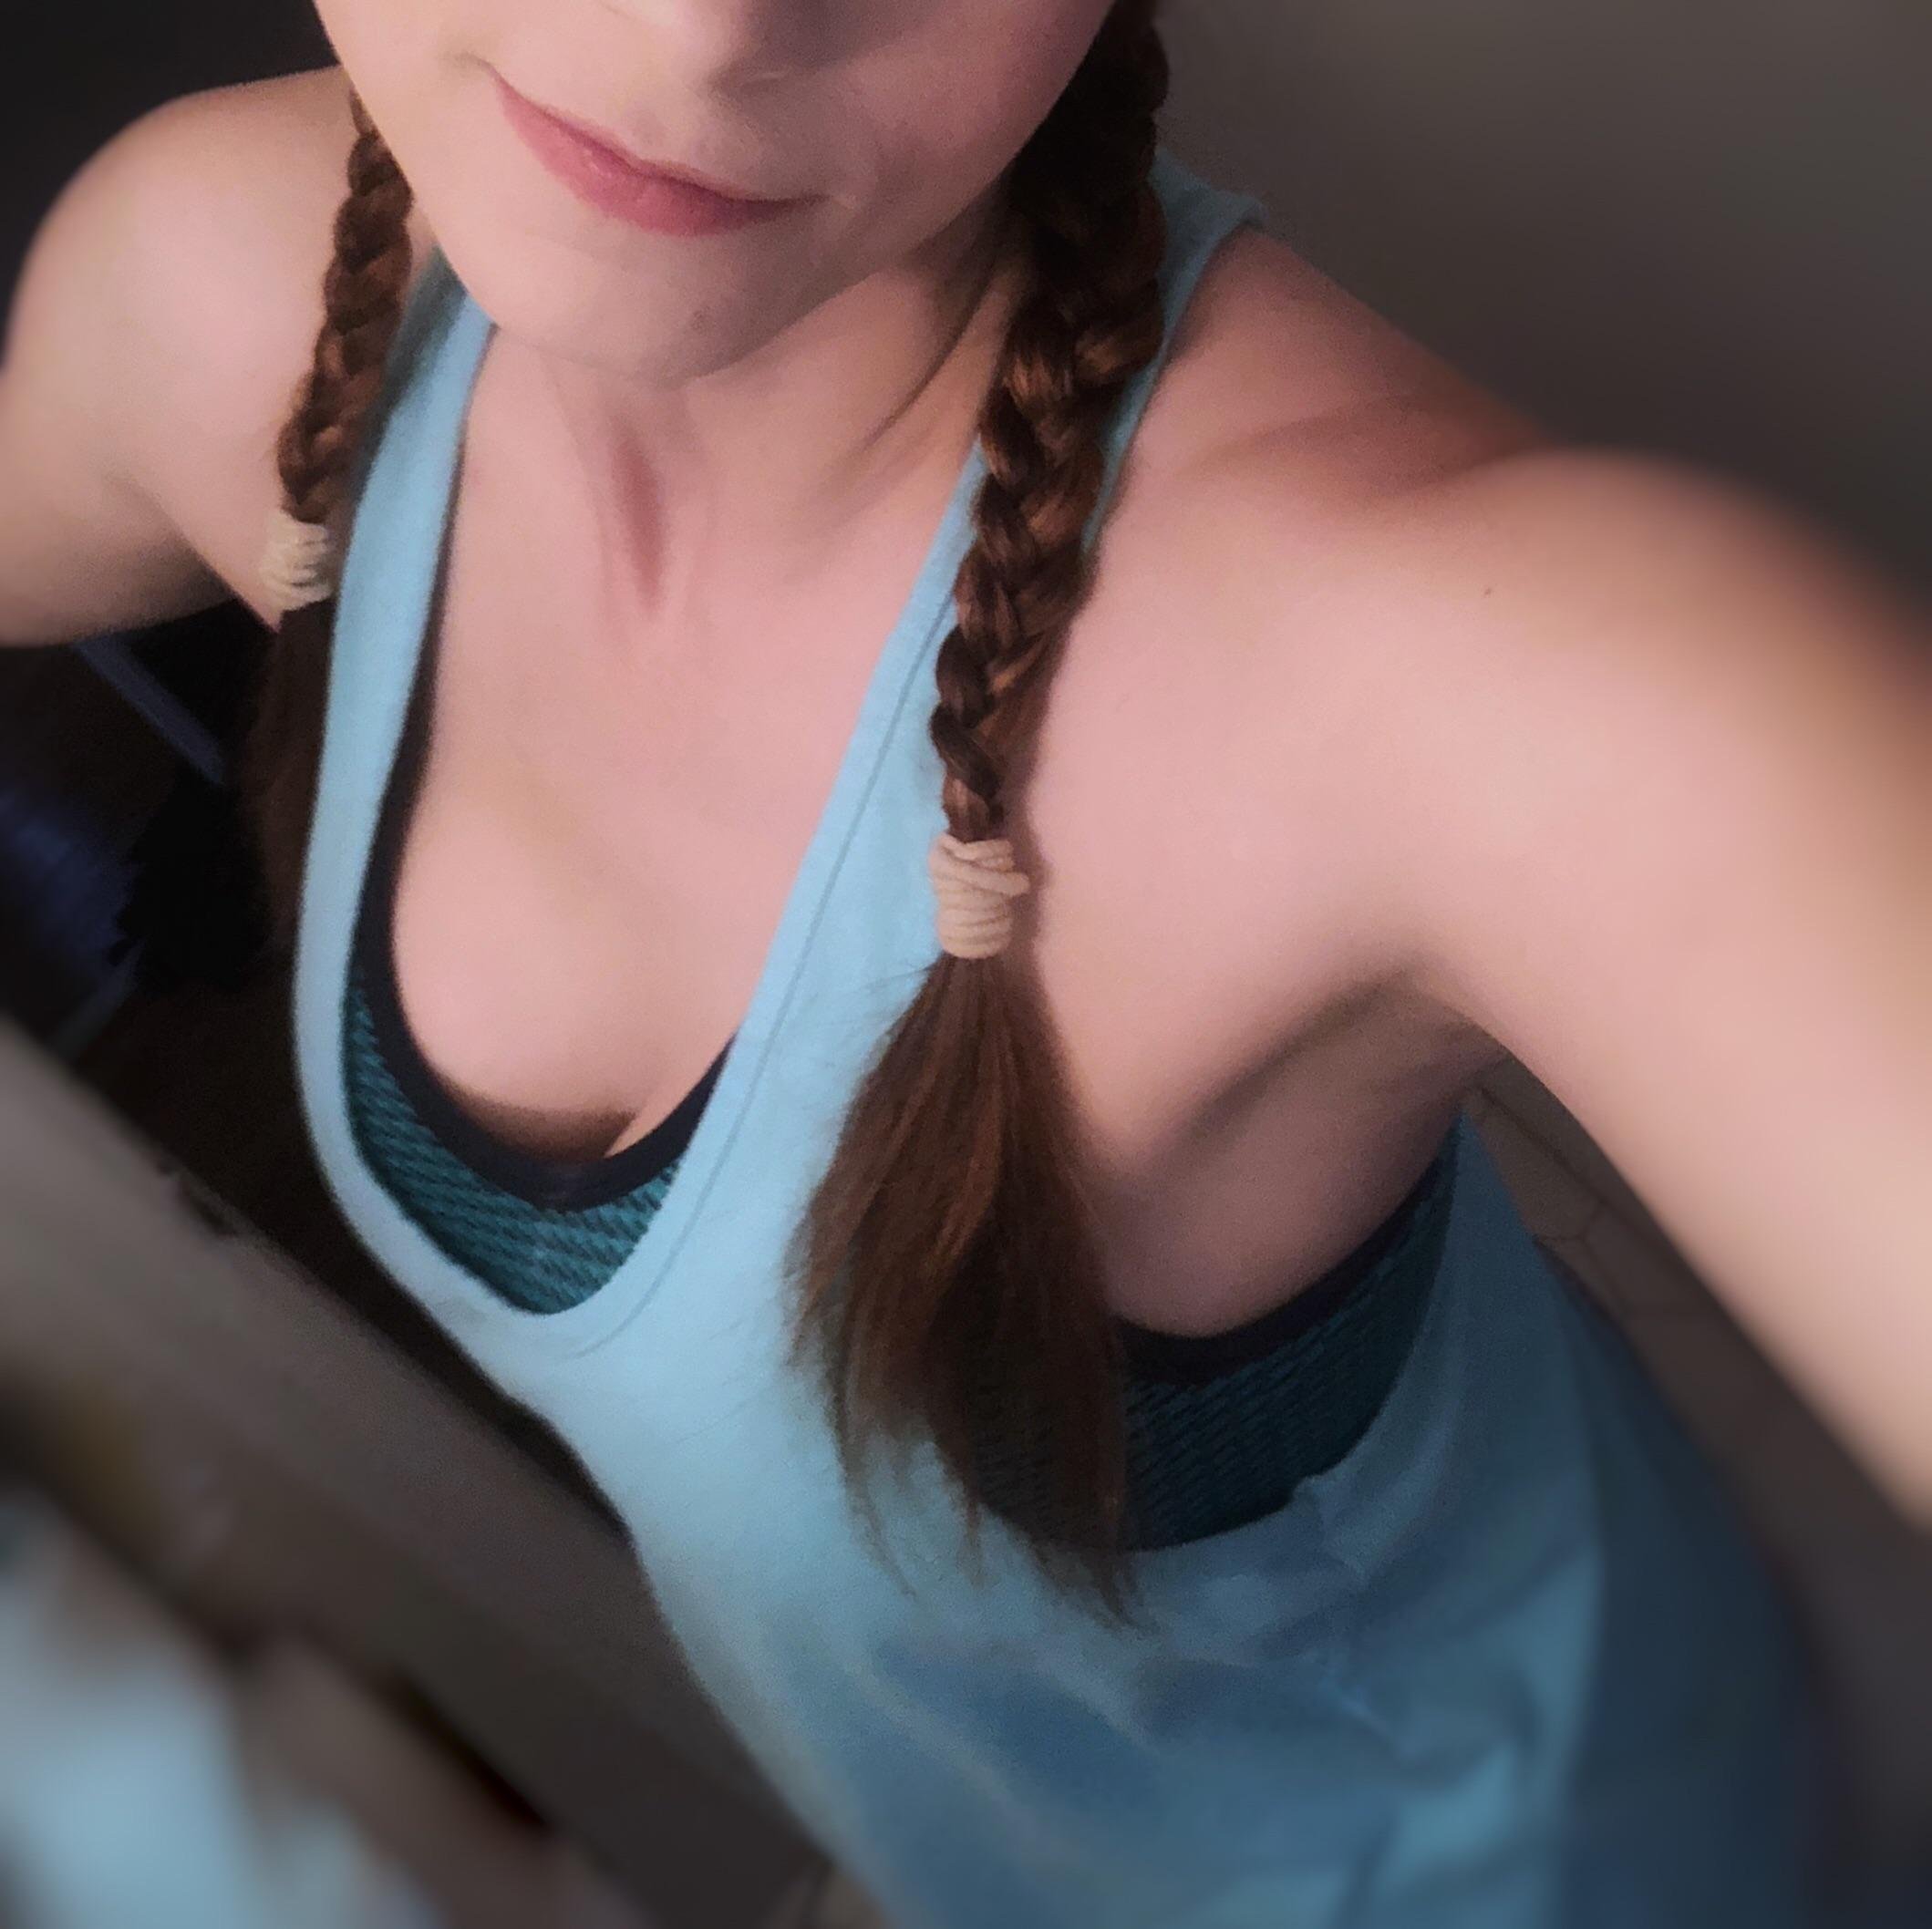 Today I felt cute when I went to the gym [33 F]